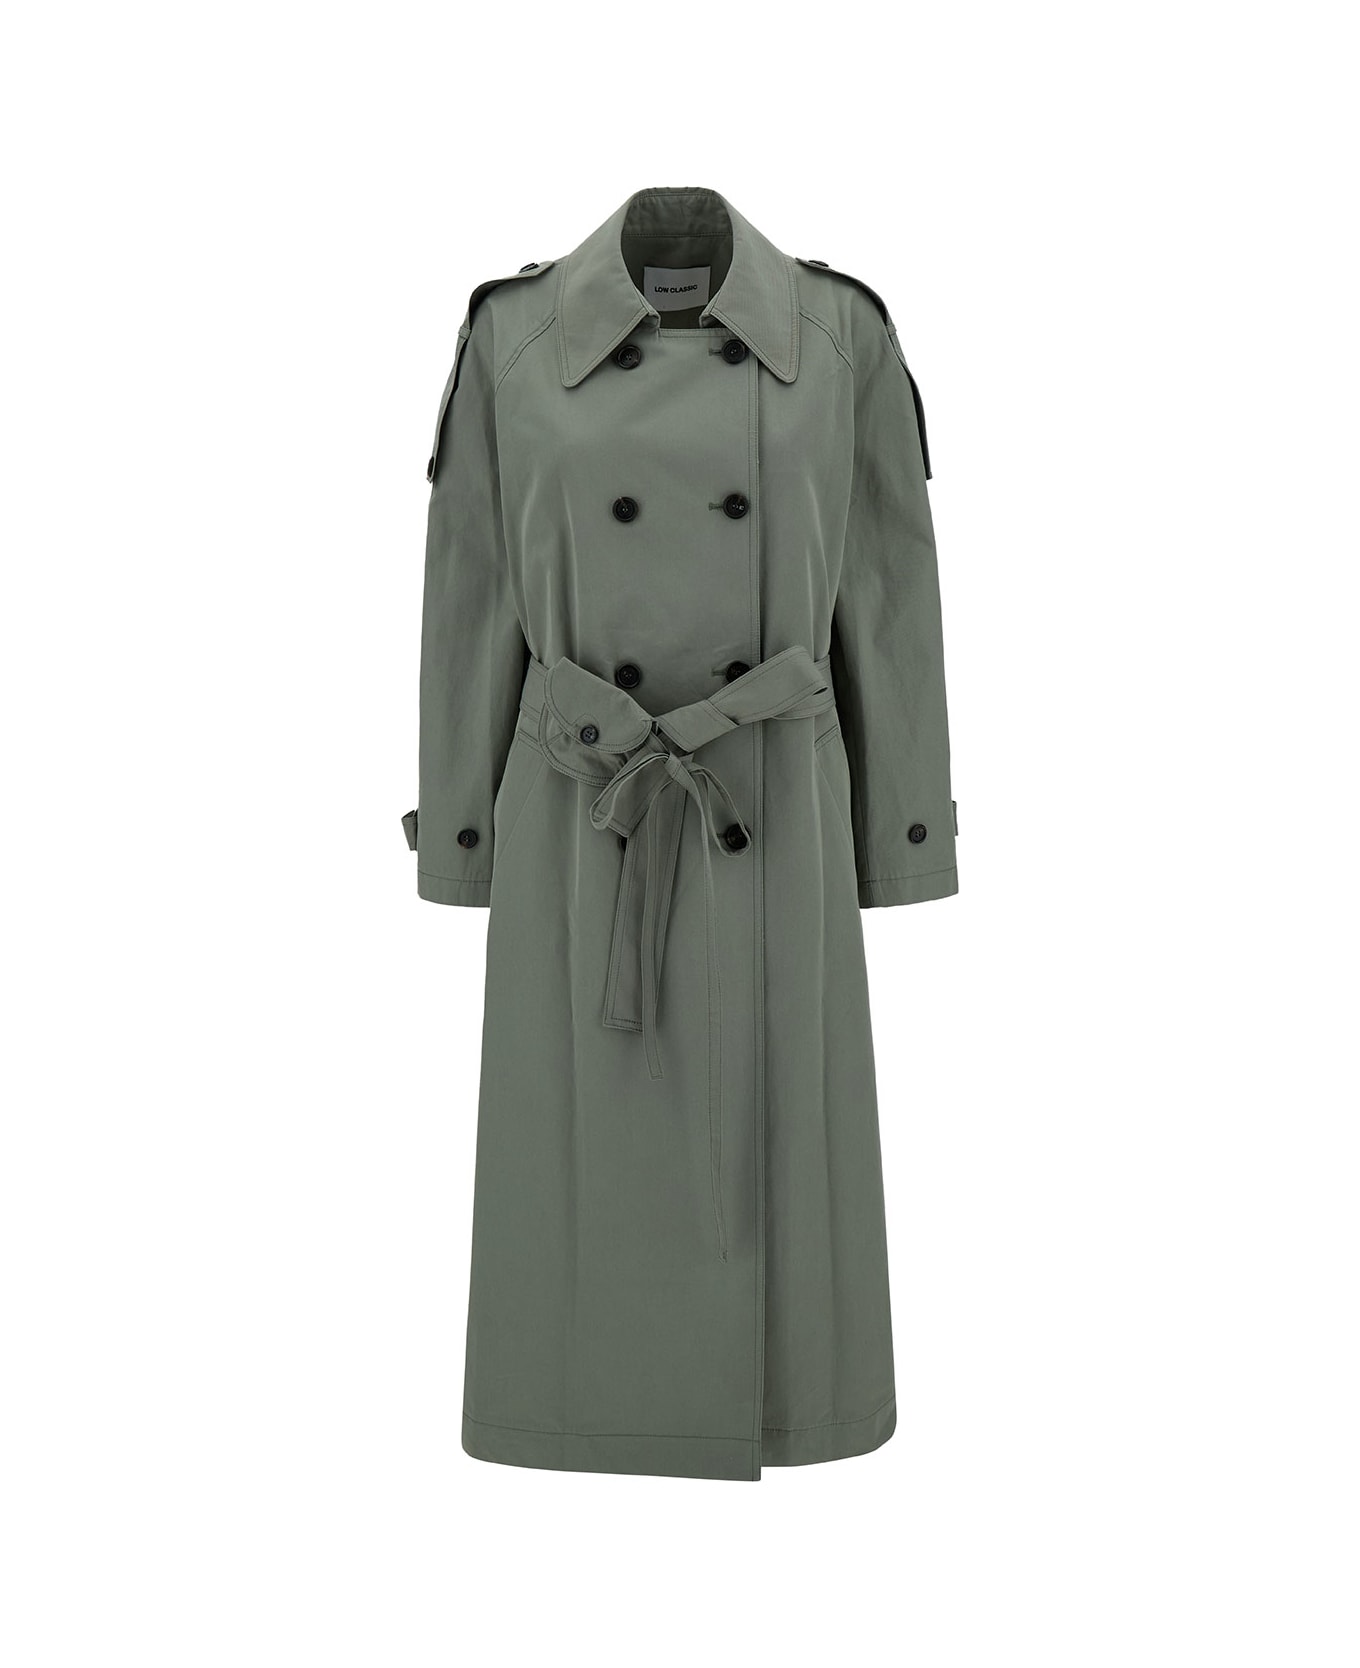 Low Classic Green Double-breasted Trench Coat With Belt In Cotton Blend Woman - Green